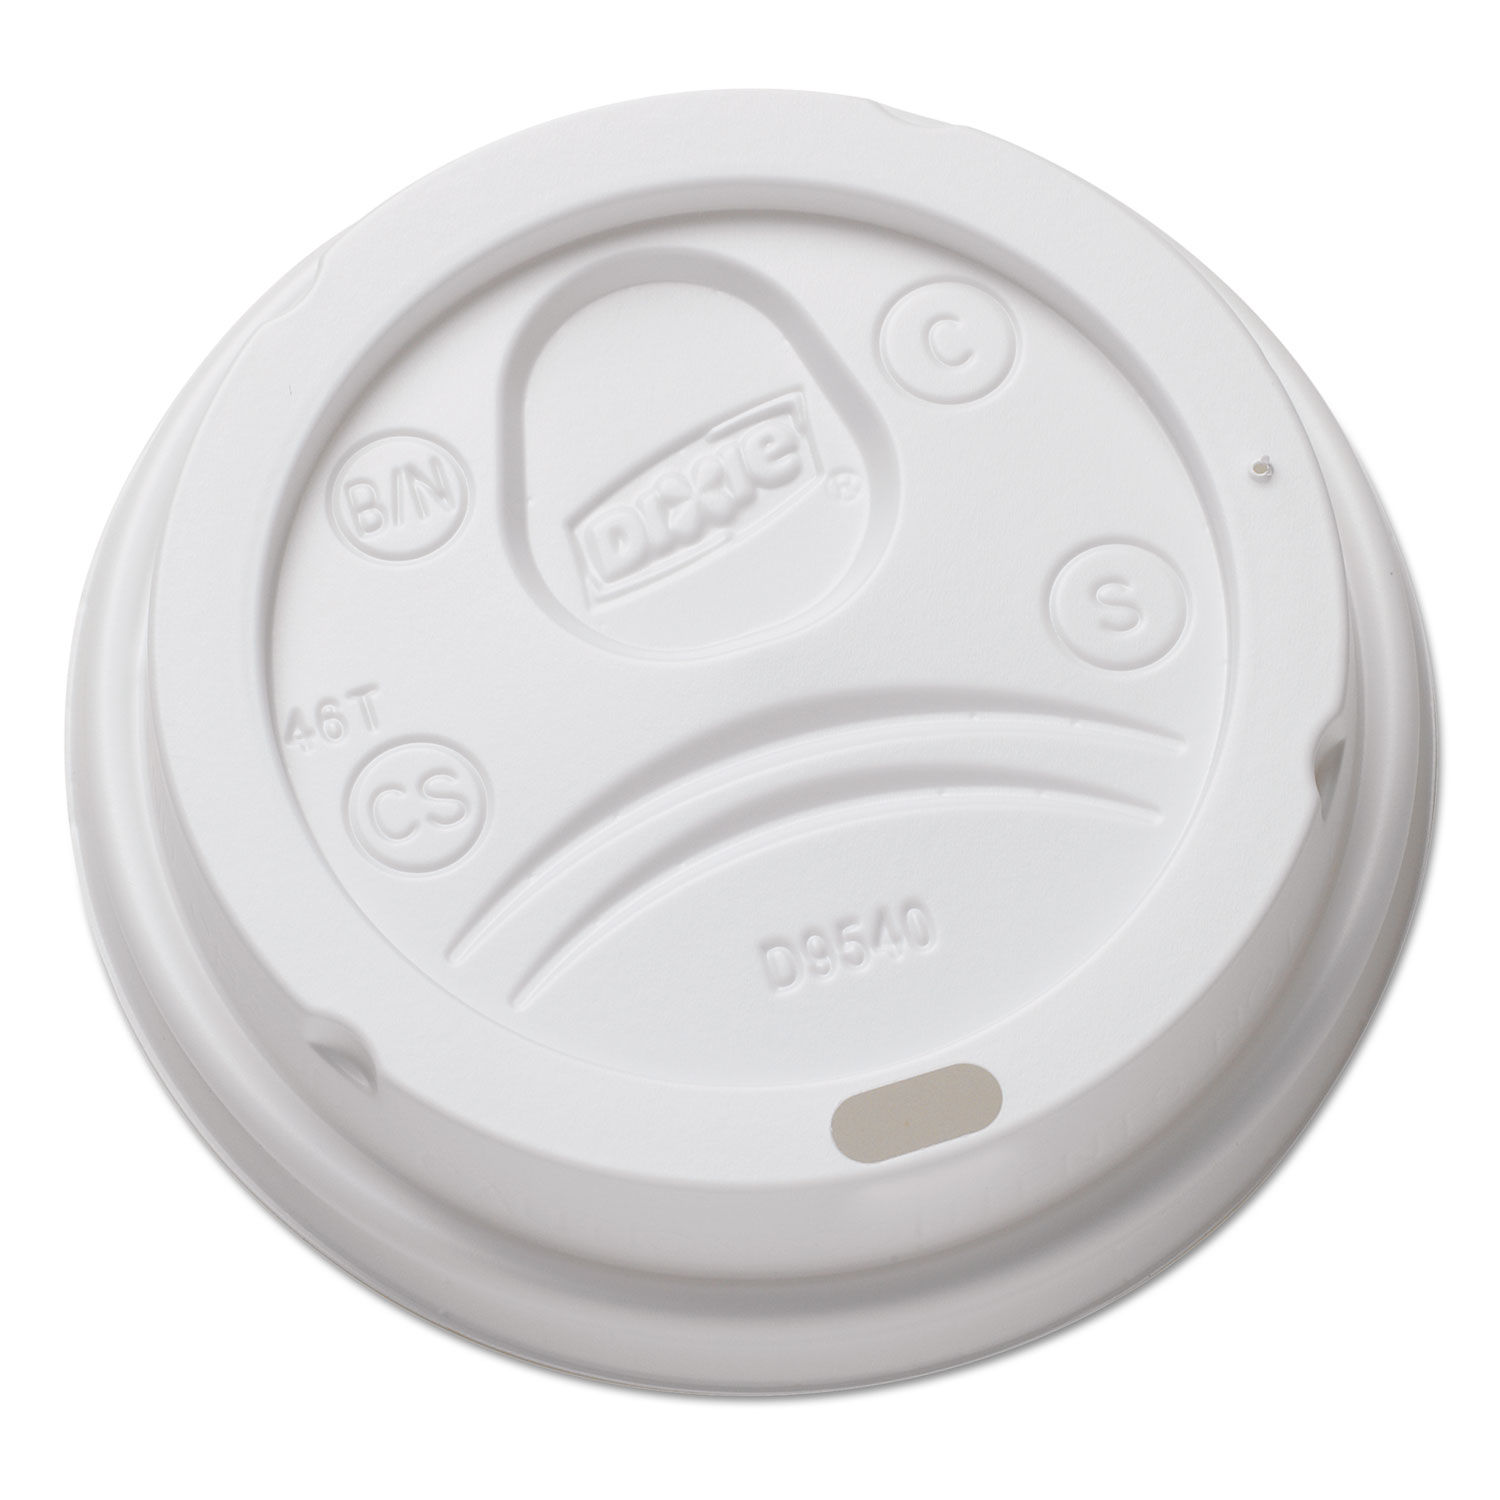  Dixie DL9540 Sip-Through Dome Hot Drink Lids for 10 oz Cups, White, 100/Pack, 1000/Carton (DXEDL9540CT) 